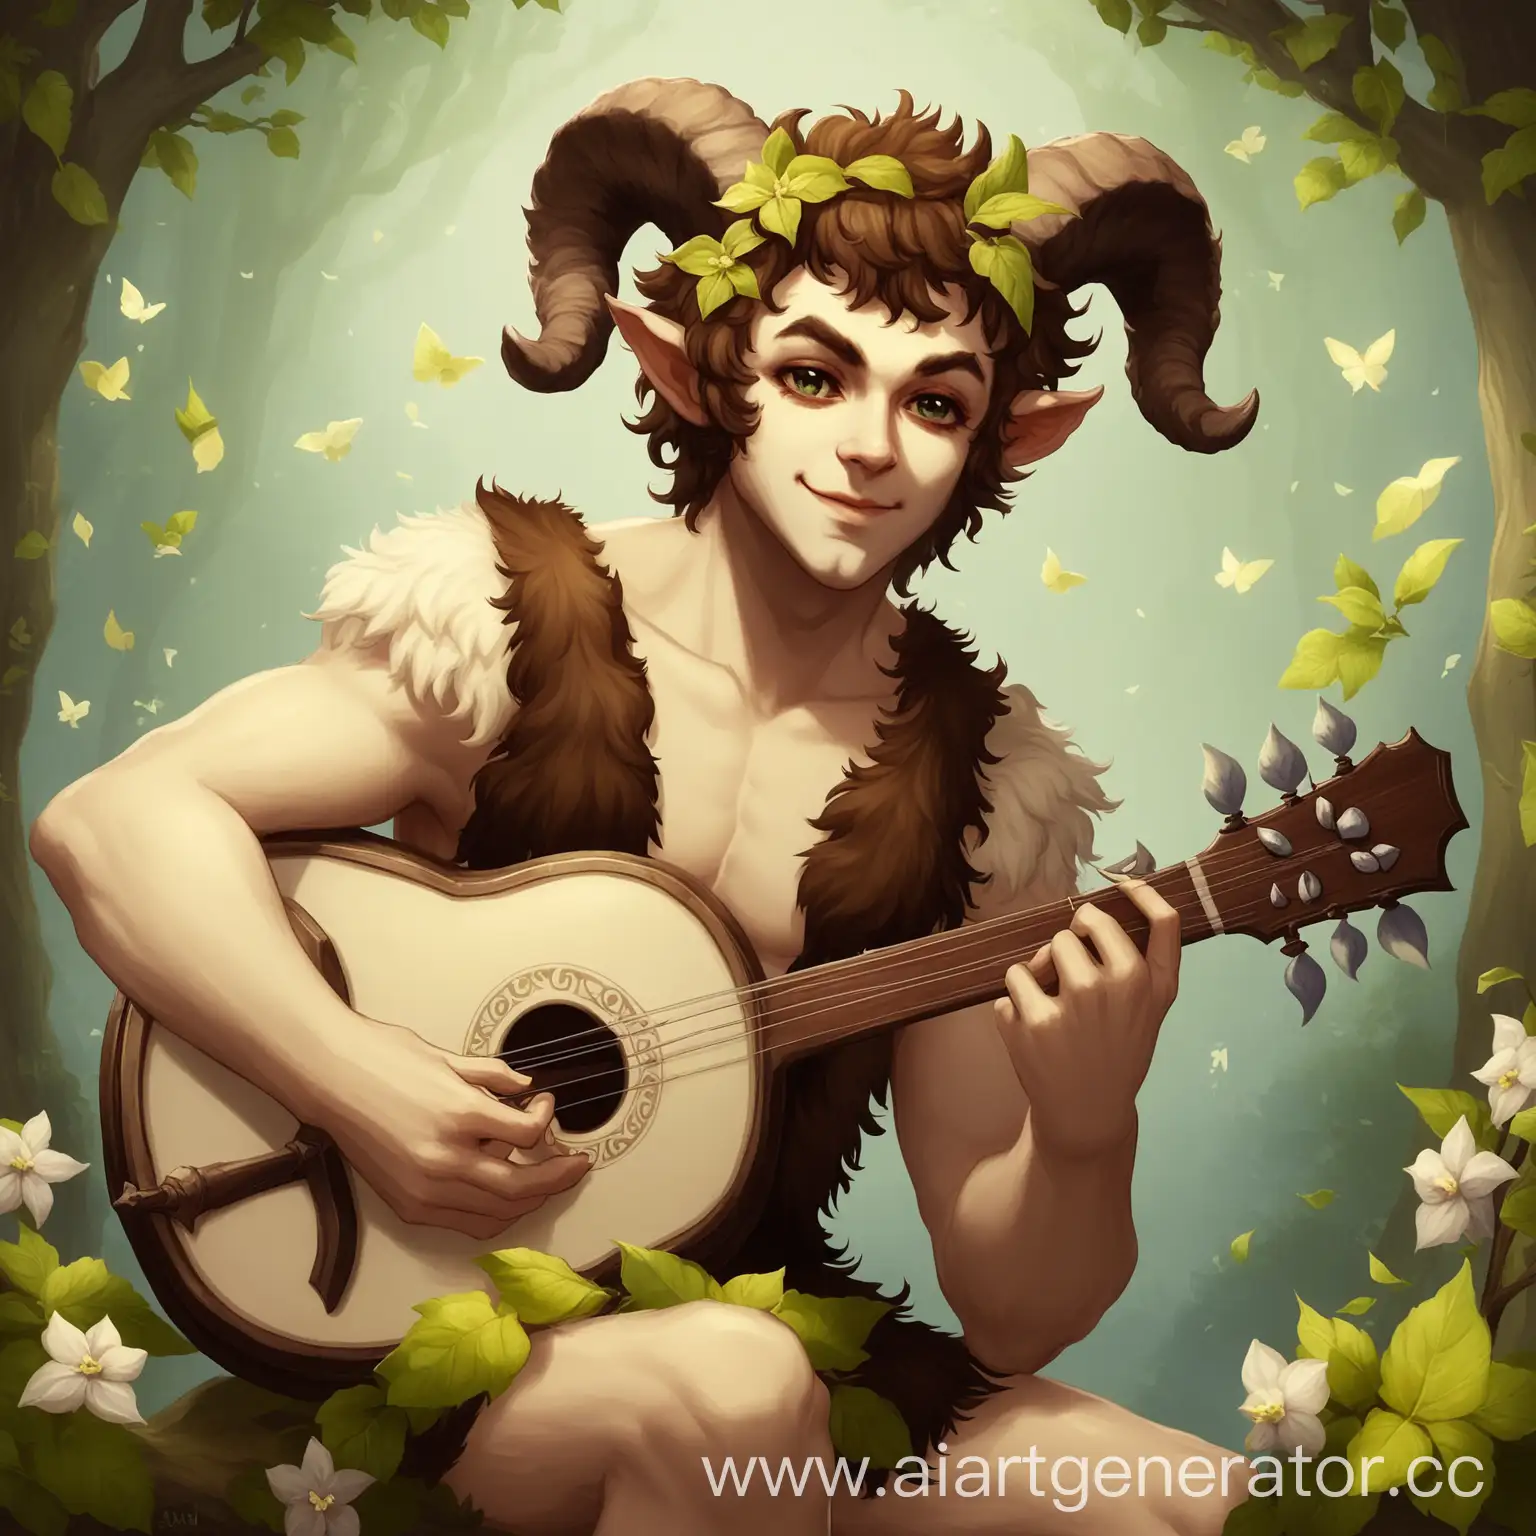 Enigmatic-BardSatyr-Playing-Flute-in-Mystical-Forest